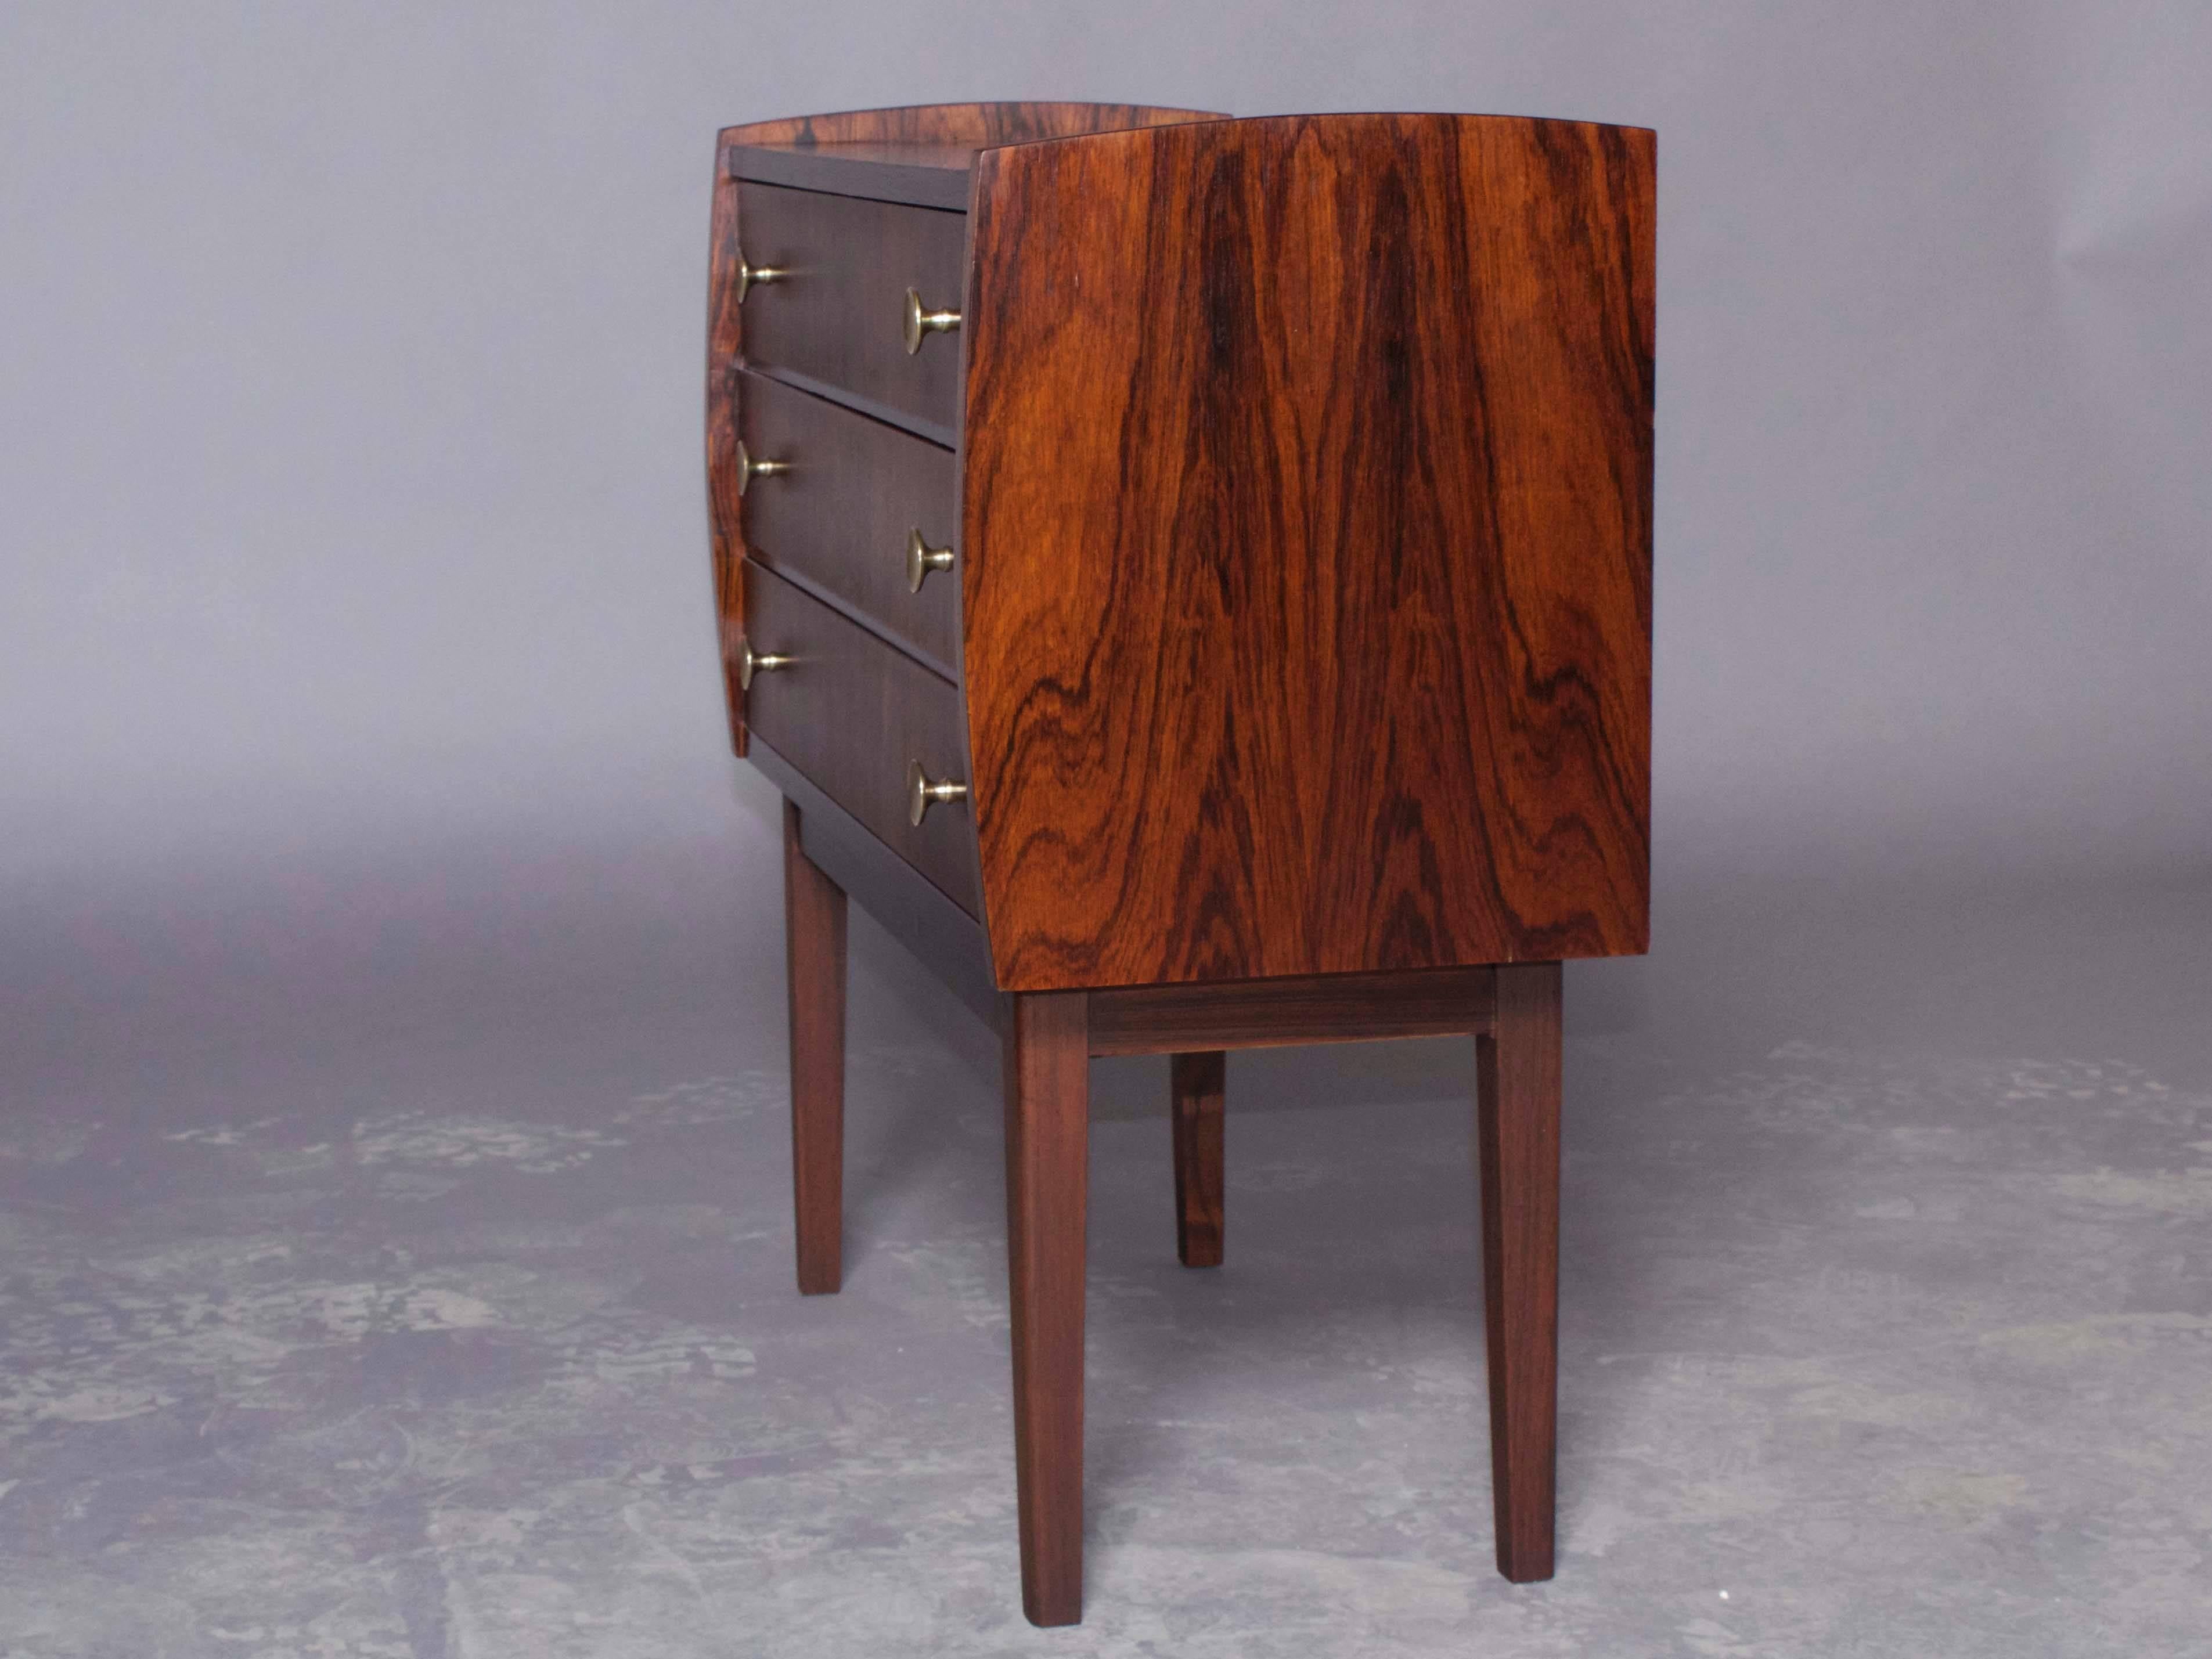 Vintage 1960s Rosewood Side Table from Denmark

Top quality rosewood bedside table with three drawers and brass pulls. Ready for pick up, delivery, or shipping anywhere in the world.